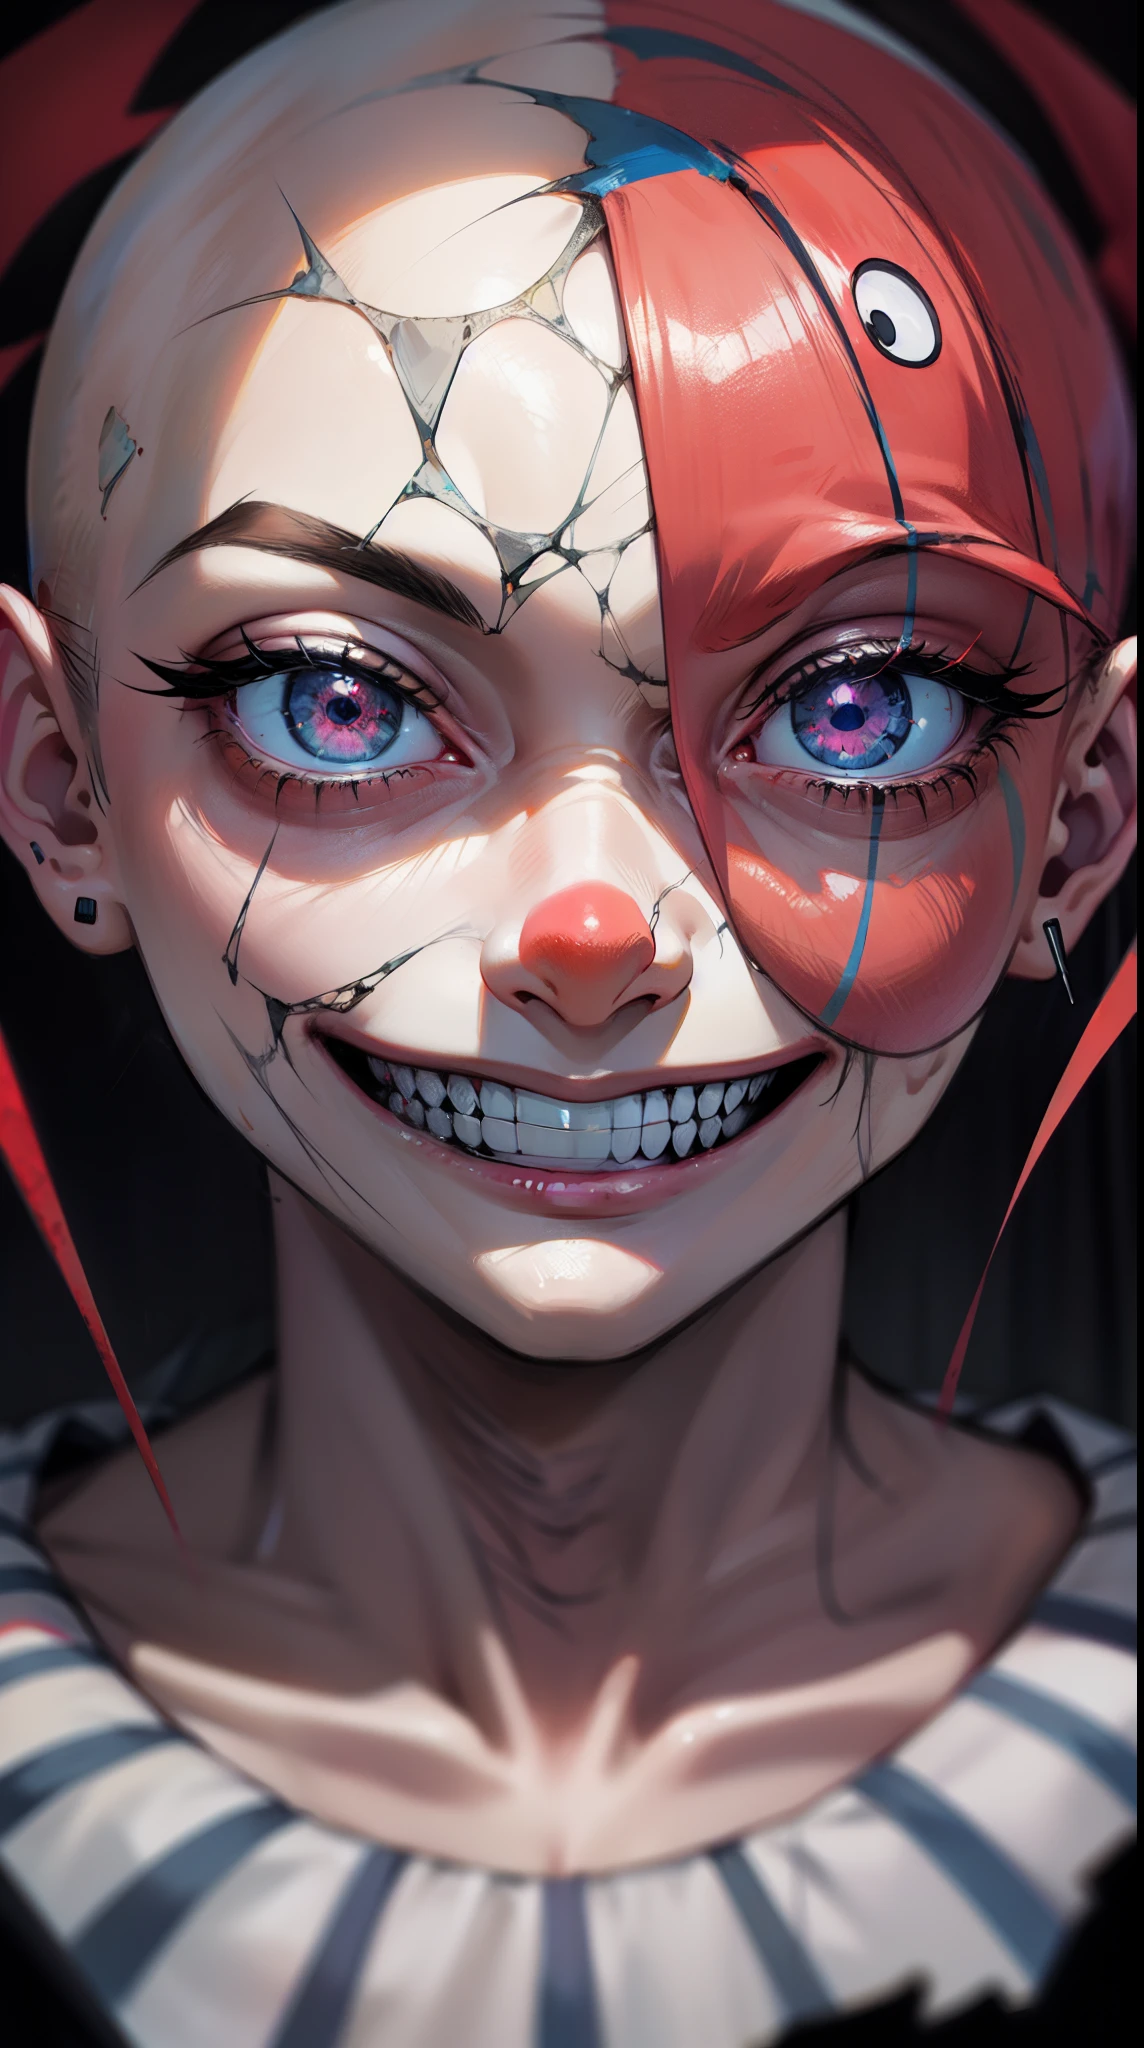 ((masterpiece)), best quality, 8k, high quality, high resolution, super detailed, ultra detailed, photorealistic, beautiful and finely detailed face and eyes, ultra detailed and detailed skin texture, expressive eyes, perfect face, 1 girl, bald head, (pale bald head), red and white face paint, tattered dress, twisted hands, (balloons), cracked clown mask, lurking in a carnival tent, haunting expression, ((maniacal grin)), night, abandoned carnival, broken rides, shattered mirrors, (creepy music), (thunderstorm), since decades, Pennywise, haunting eyes, nightmare circus background.